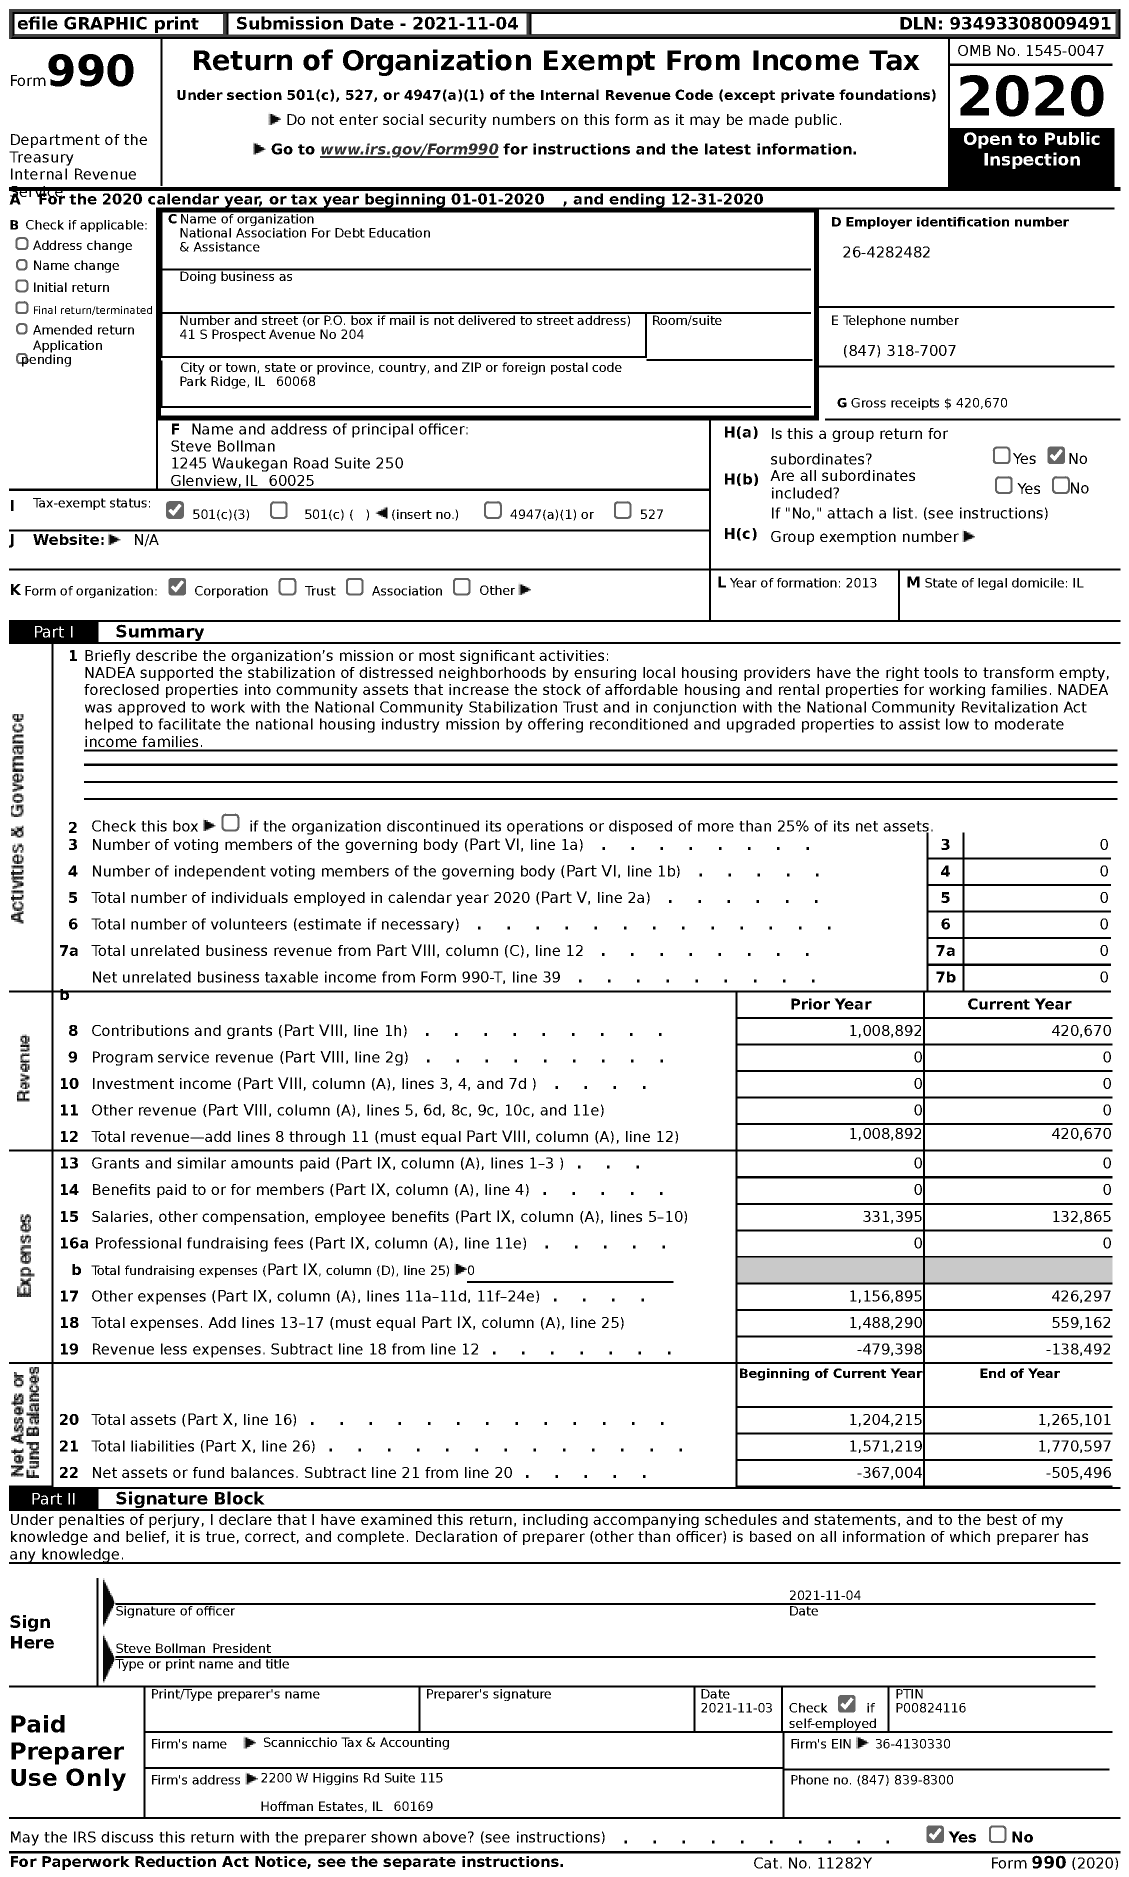 Image of first page of 2020 Form 990 for National Association for Debt Education and Assistance (NADEA)